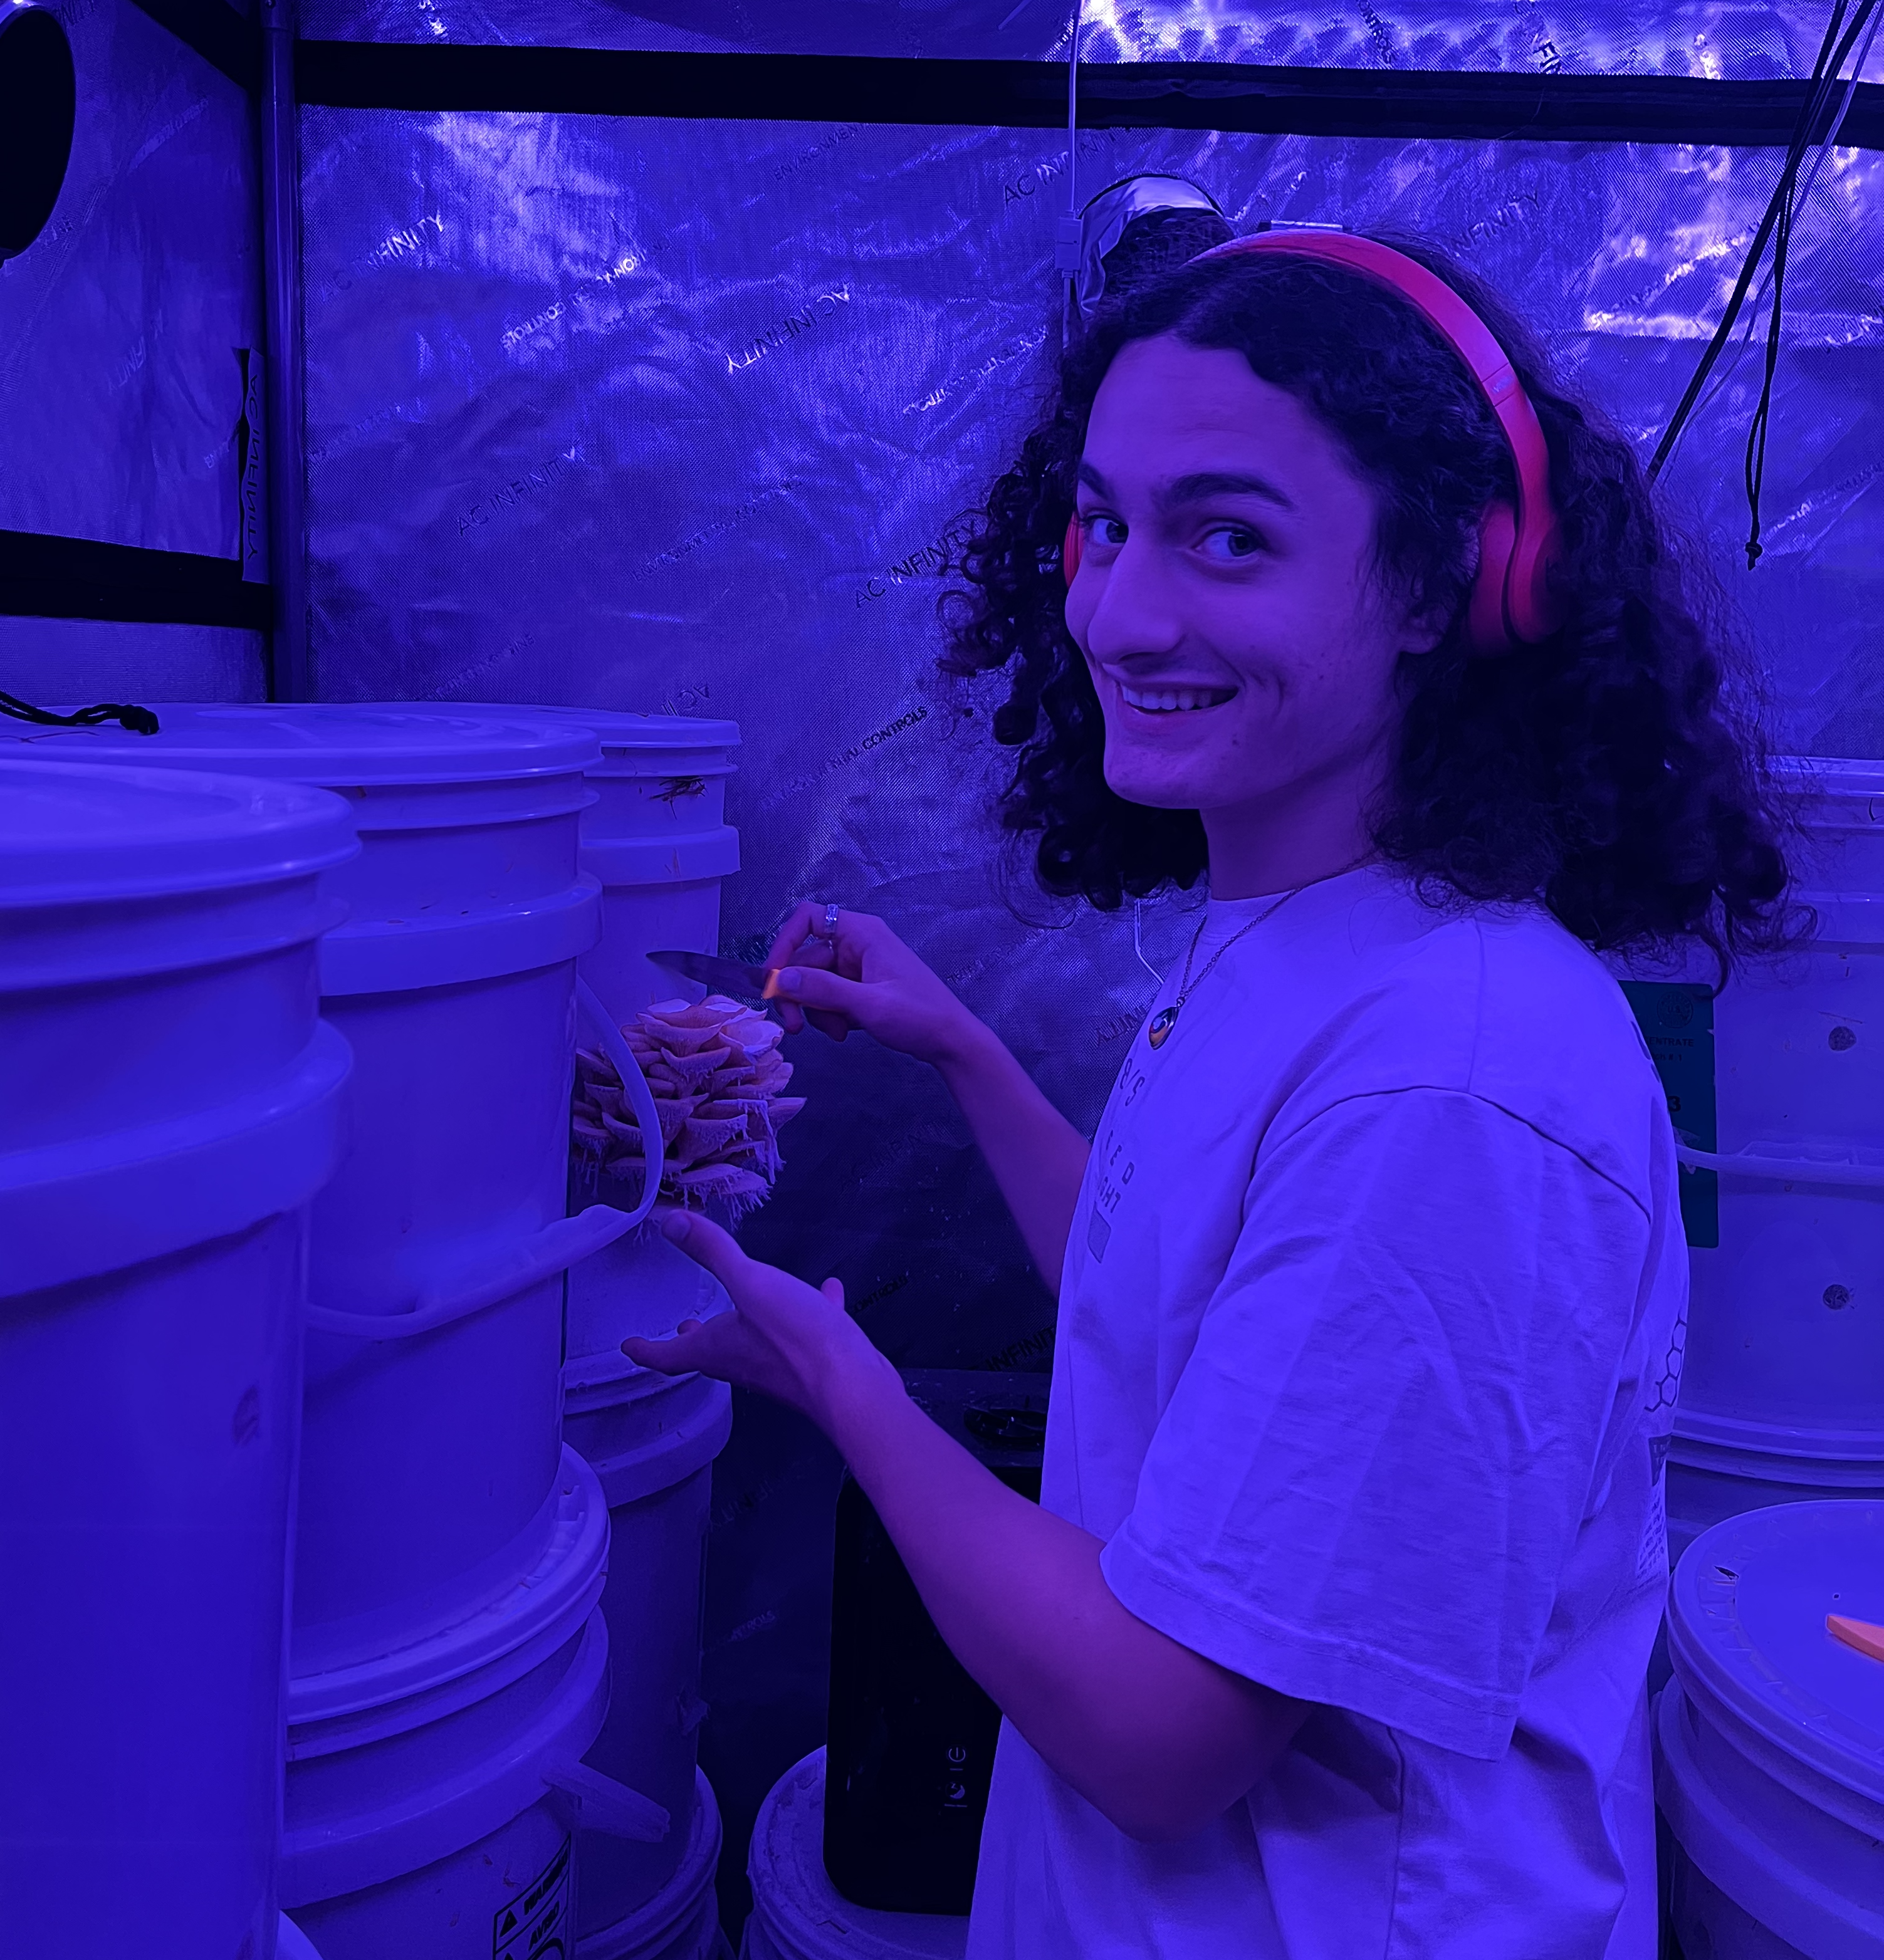 Student pictured tending to the mushrooms growing in the basement of the Oxford Houses.